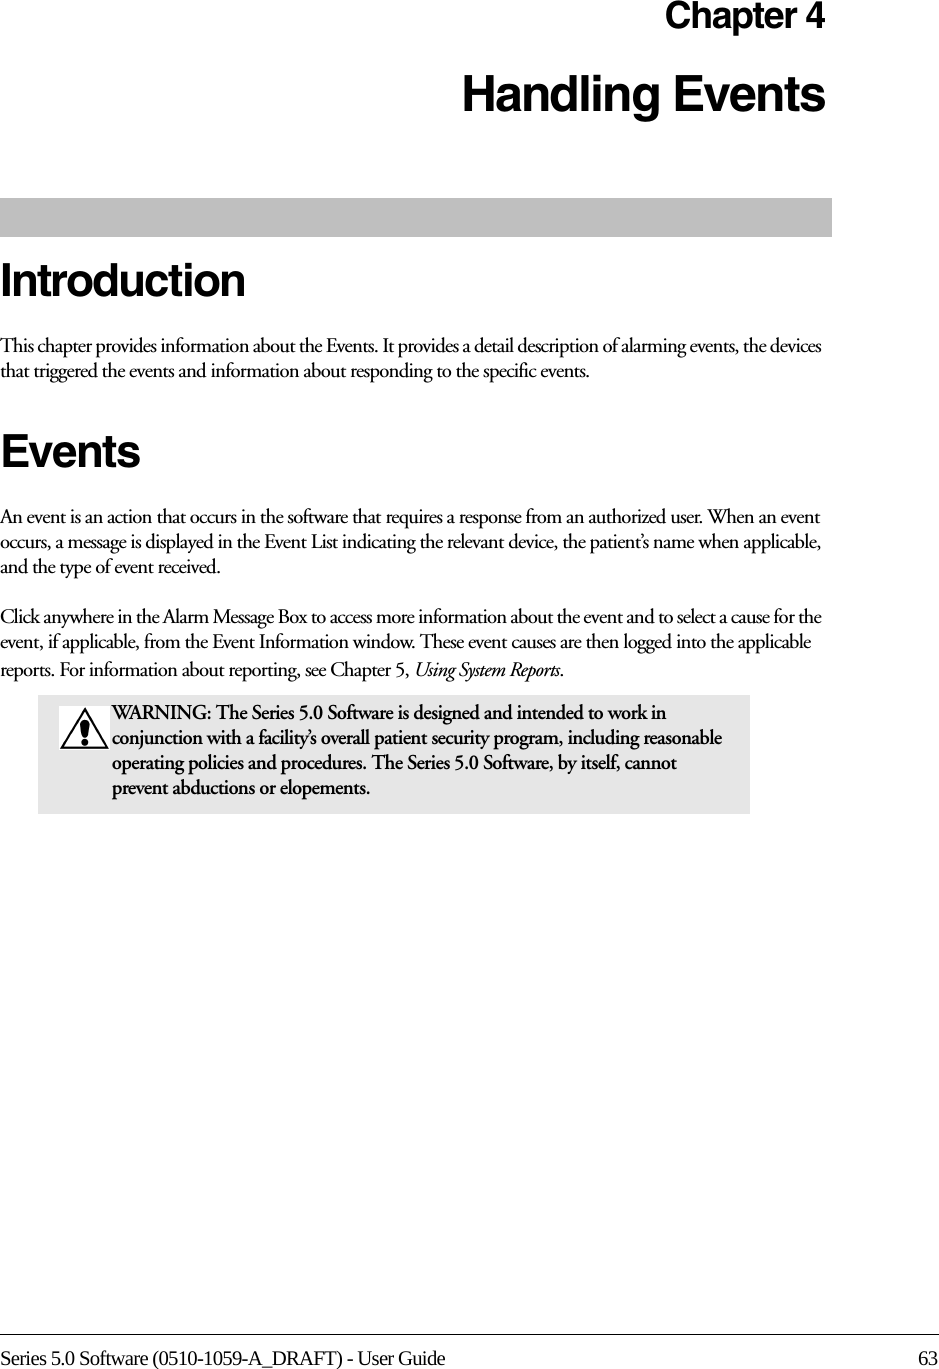 Series 5.0 Software (0510-1059-A_DRAFT) - User Guide 63Chapter 4Handling EventsIntroductionThis chapter provides information about the Events. It provides a detail description of alarming events, the devices that triggered the events and information about responding to the specific events. Events An event is an action that occurs in the software that requires a response from an authorized user. When an event occurs, a message is displayed in the Event List indicating the relevant device, the patient’s name when applicable, and the type of event received. Click anywhere in the Alarm Message Box to access more information about the event and to select a cause for the event, if applicable, from the Event Information window. These event causes are then logged into the applicable reports. For information about reporting, see Chapter 5, Using System Reports.WARNING: The Series 5.0 Software is designed and intended to work in conjunction with a facility’s overall patient security program, including reasonable operating policies and procedures. The Series 5.0 Software, by itself, cannot prevent abductions or elopements. 